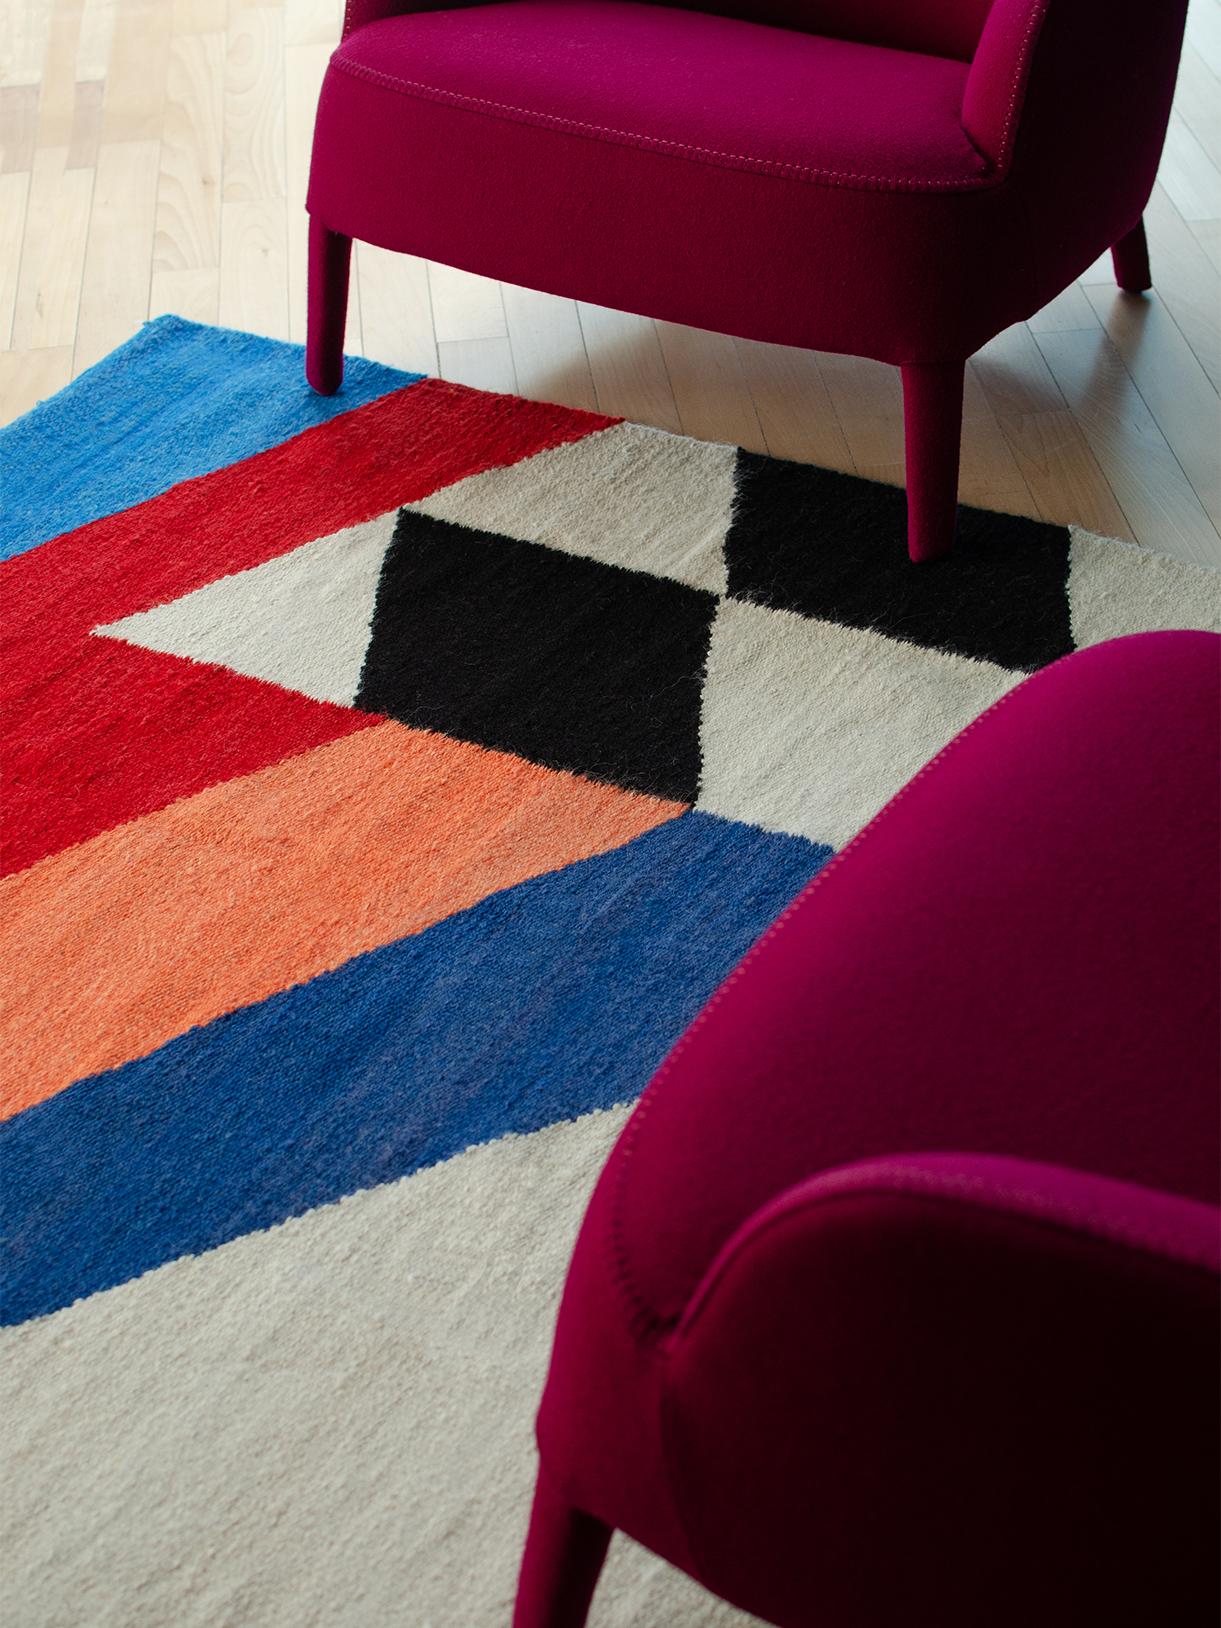 Adapted from the original artwork by Kenneth Kemble, Unititled, 1966.

Limited edition of 15 handmade and unique rugs.  

LALANA RUGS is an applied arts initiative born from the desire to combine proposals by contemporary artists with traditional